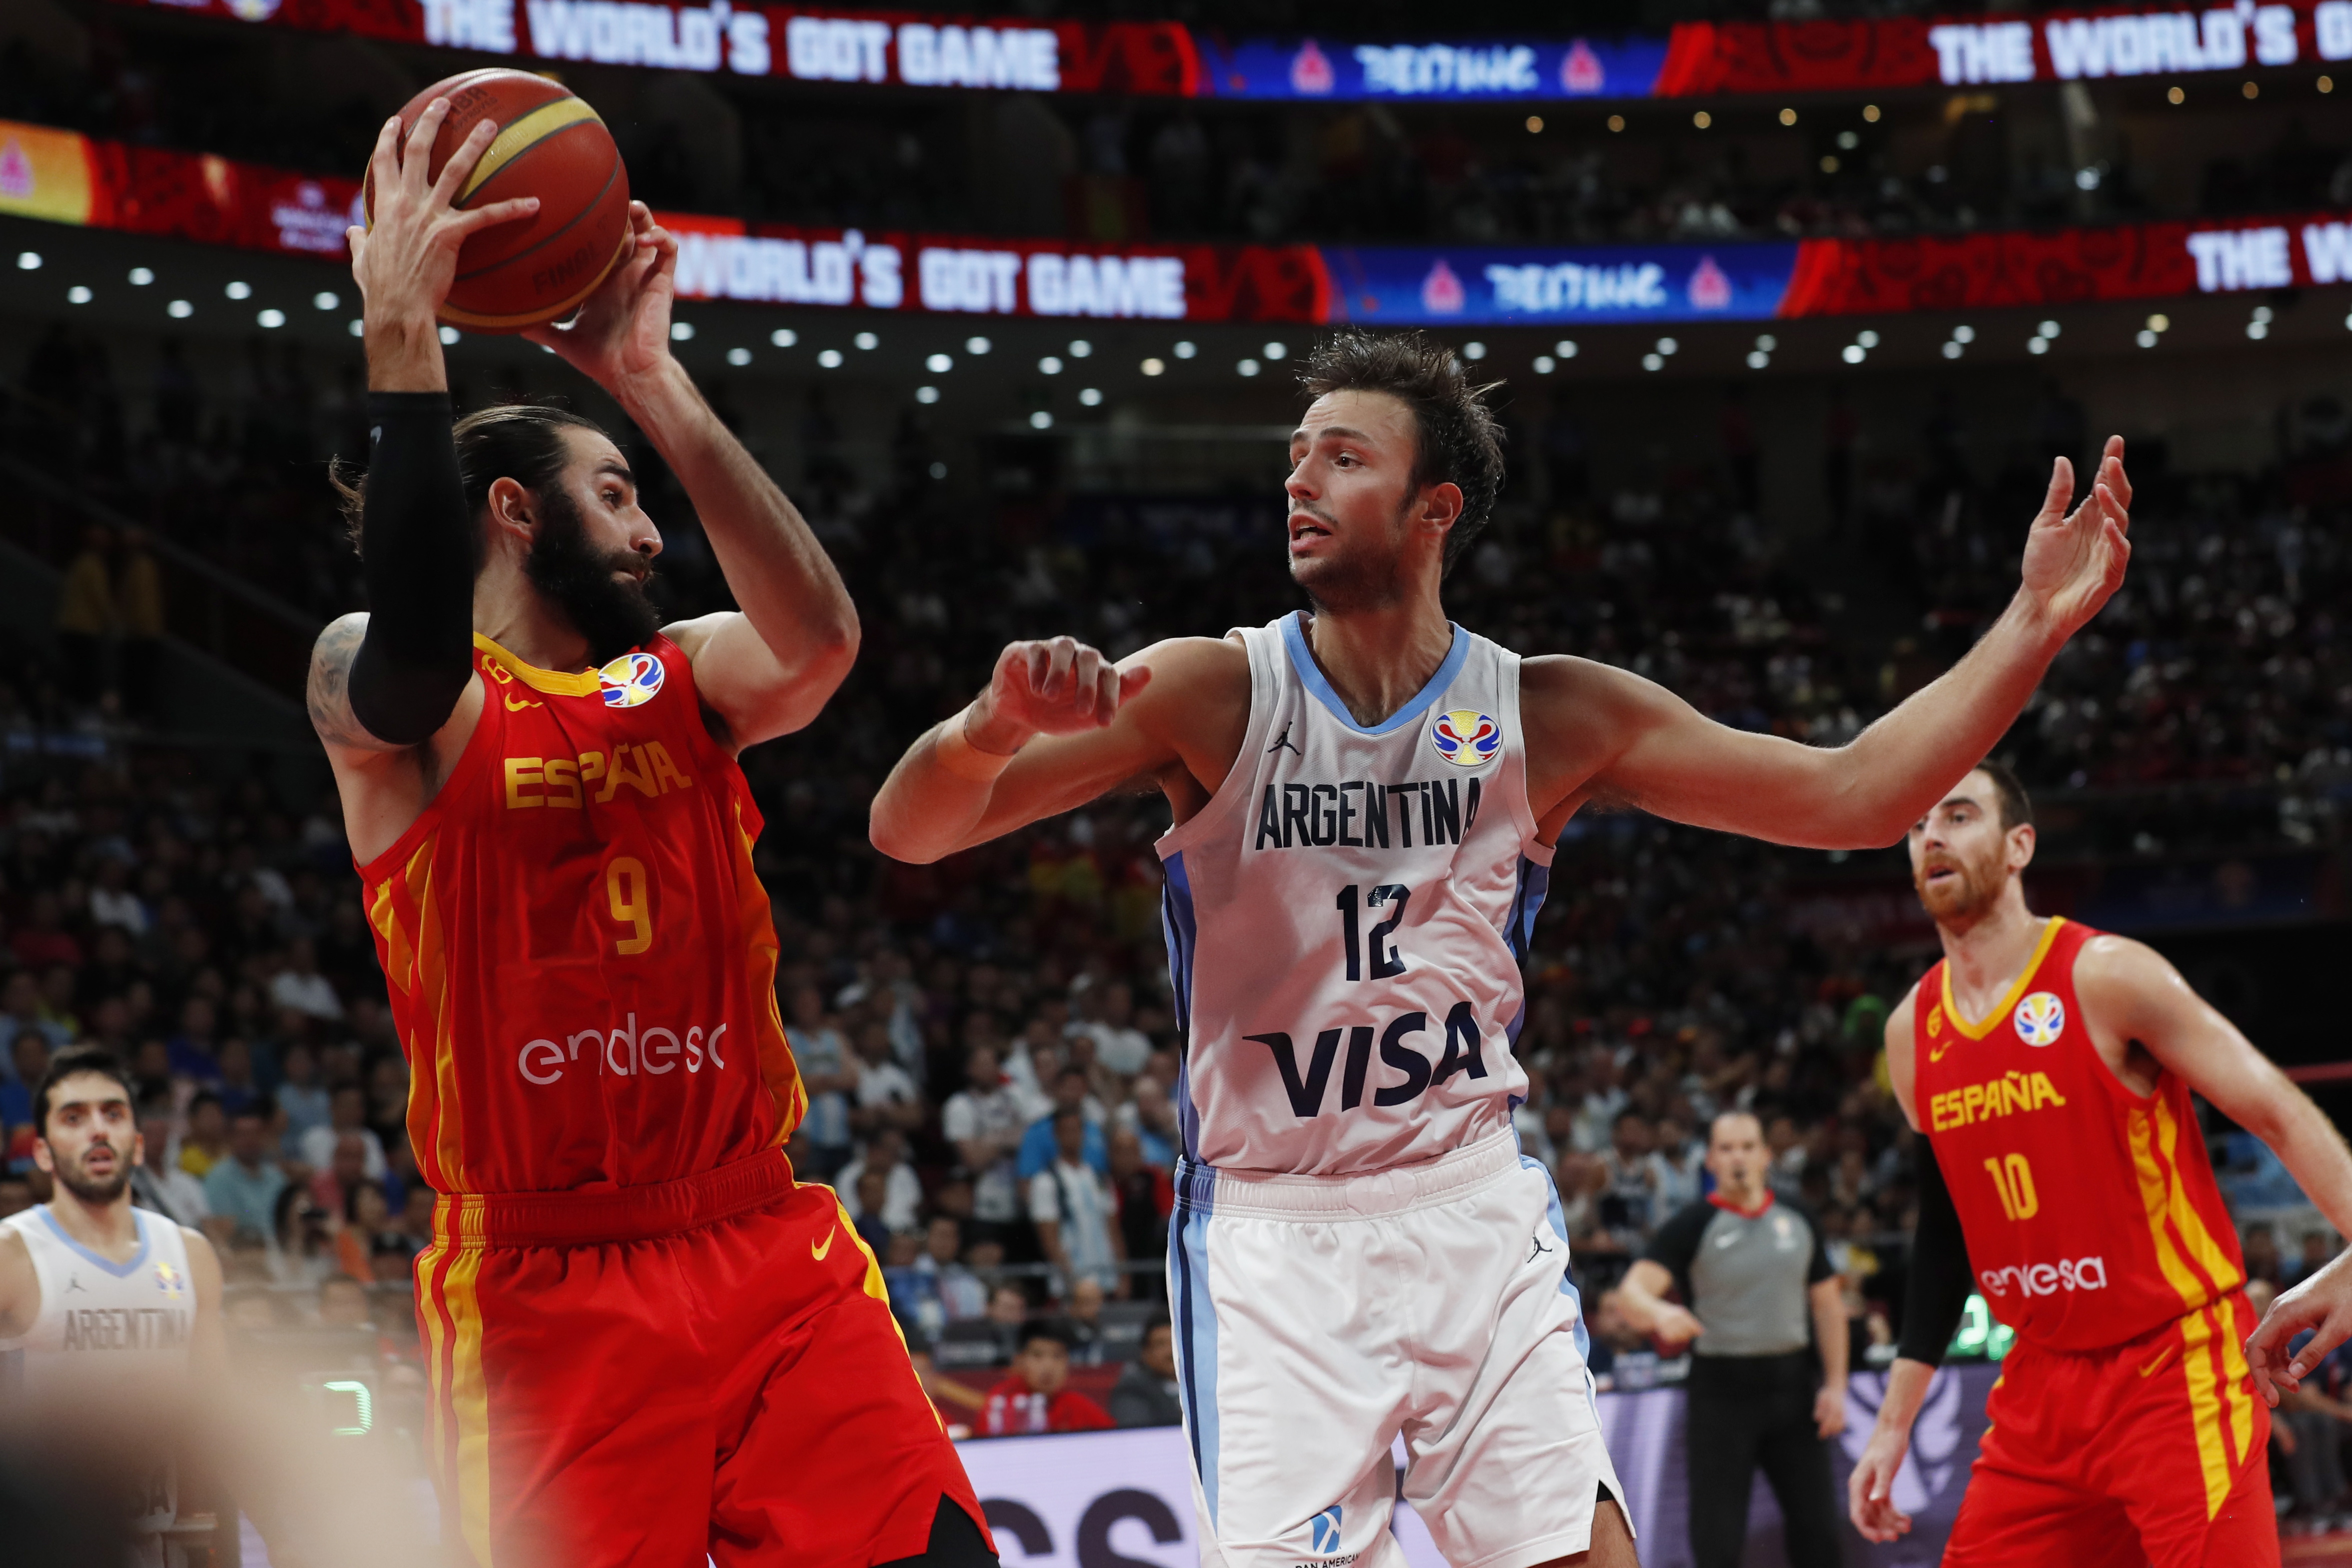 epa07844338 Ricky Rubio of Spain (L) in action against Marcos Delia of Argentina during the FIBA Basketball World Cup 2019 final match between Argentina and Spain, in Beijing, China, 15 September 2019.  EPA/ROMAN PILIPEY